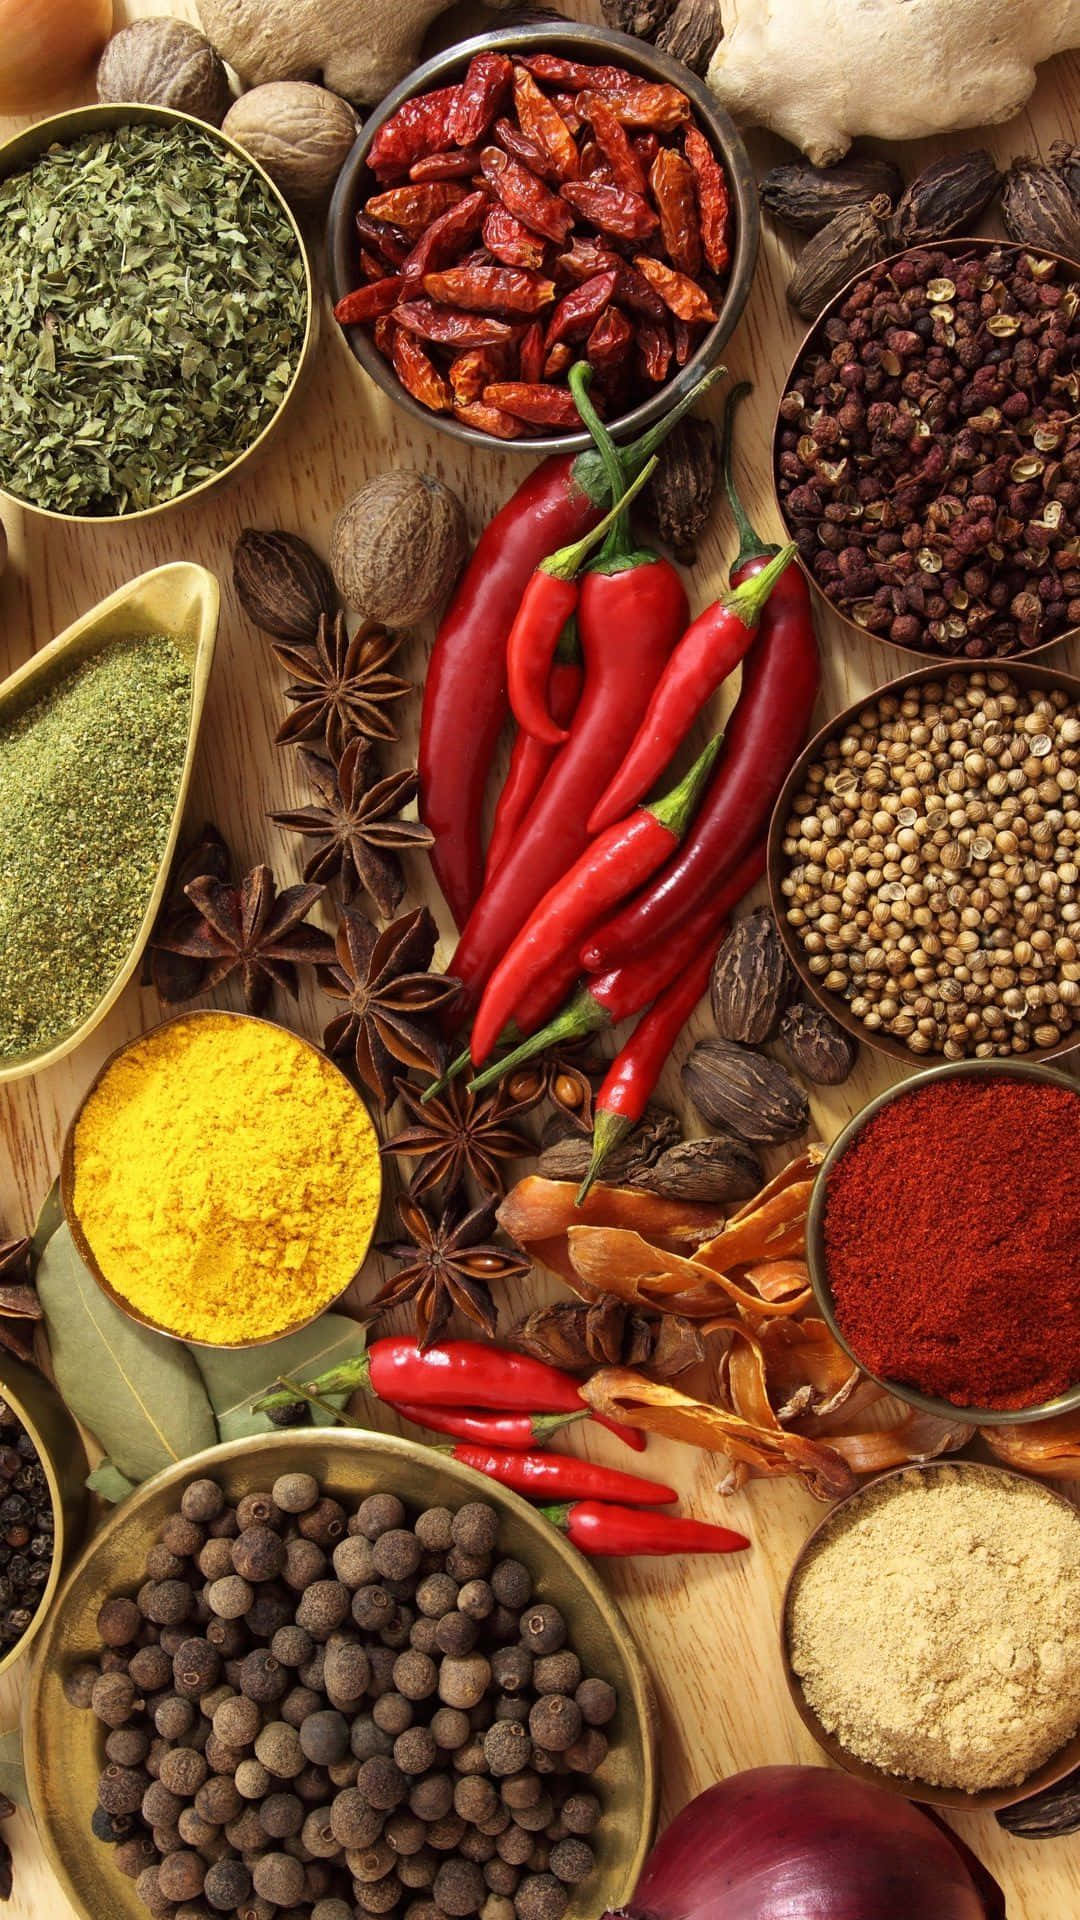 Free Spices Wallpaper Downloads, [100+] Spices Wallpapers for FREE |  